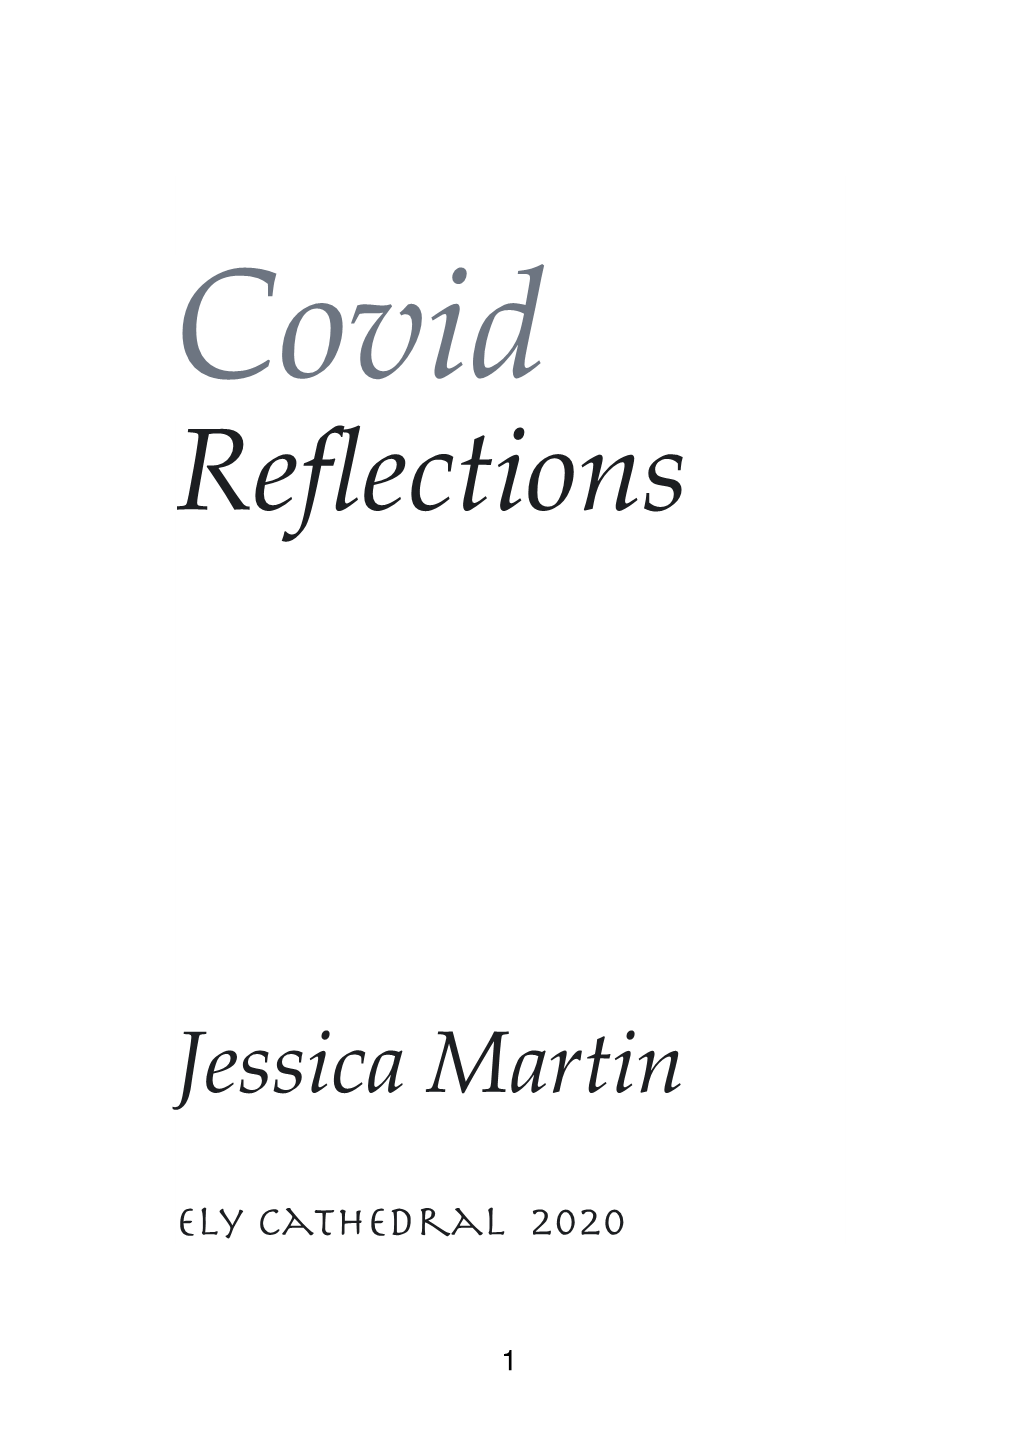 Covid Reflections